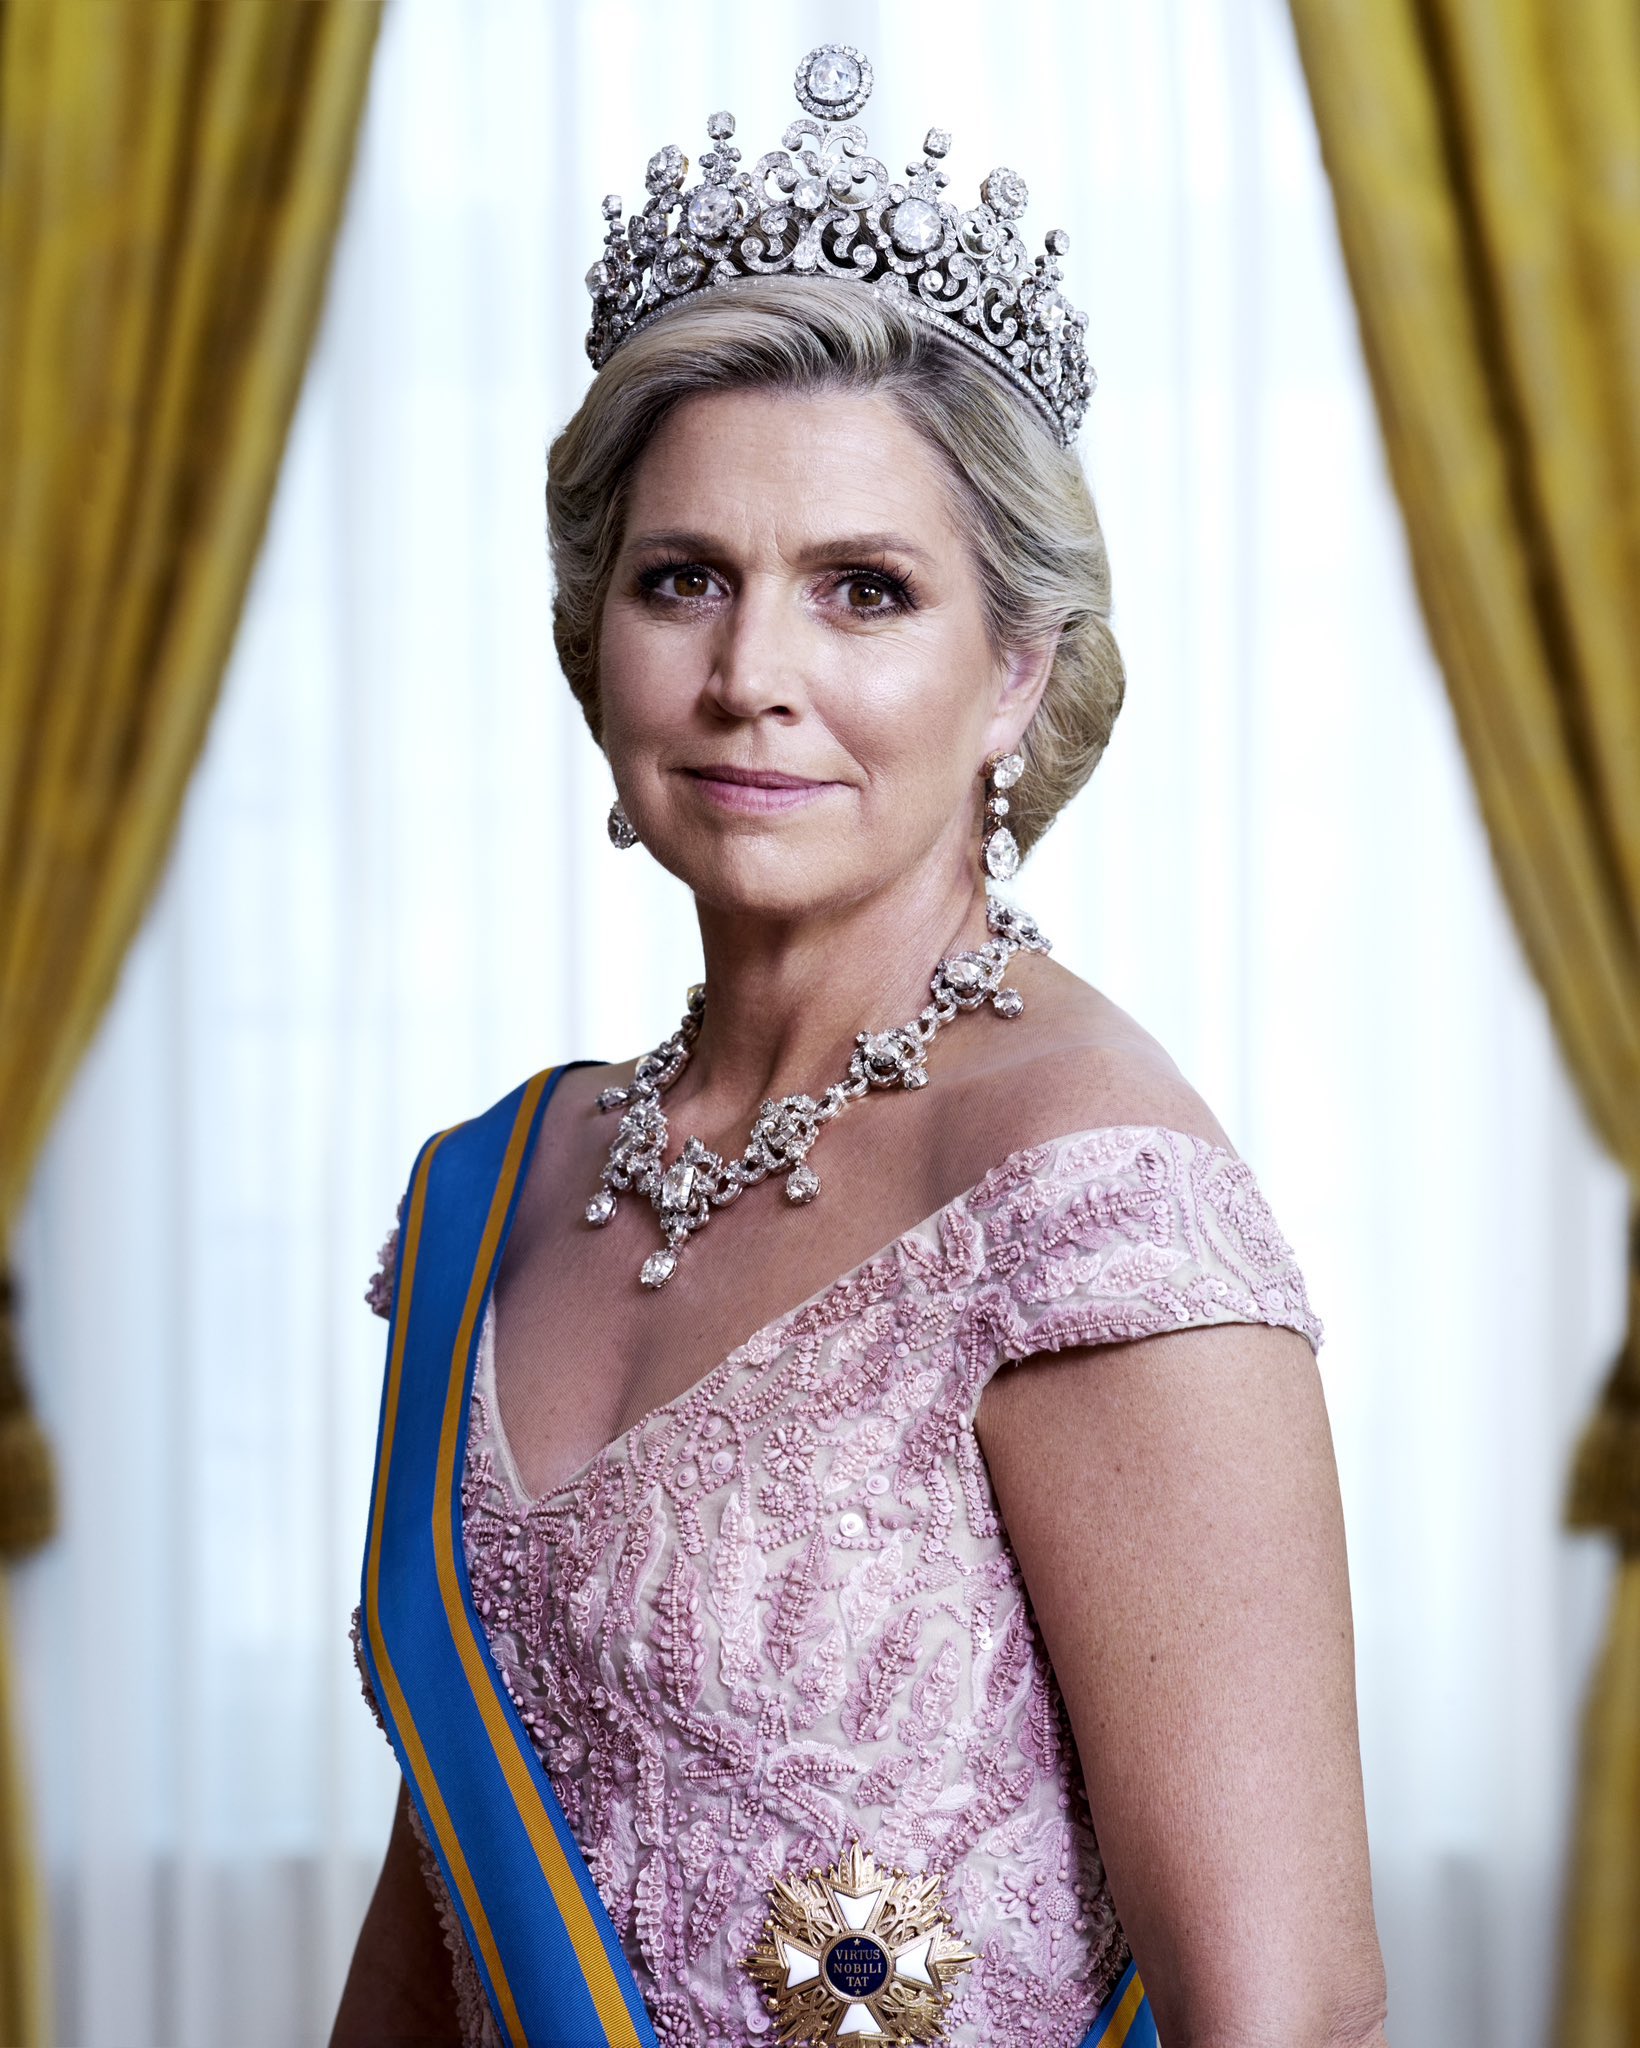 Queen Maxima's boldest look: who needs accessories with that dress?